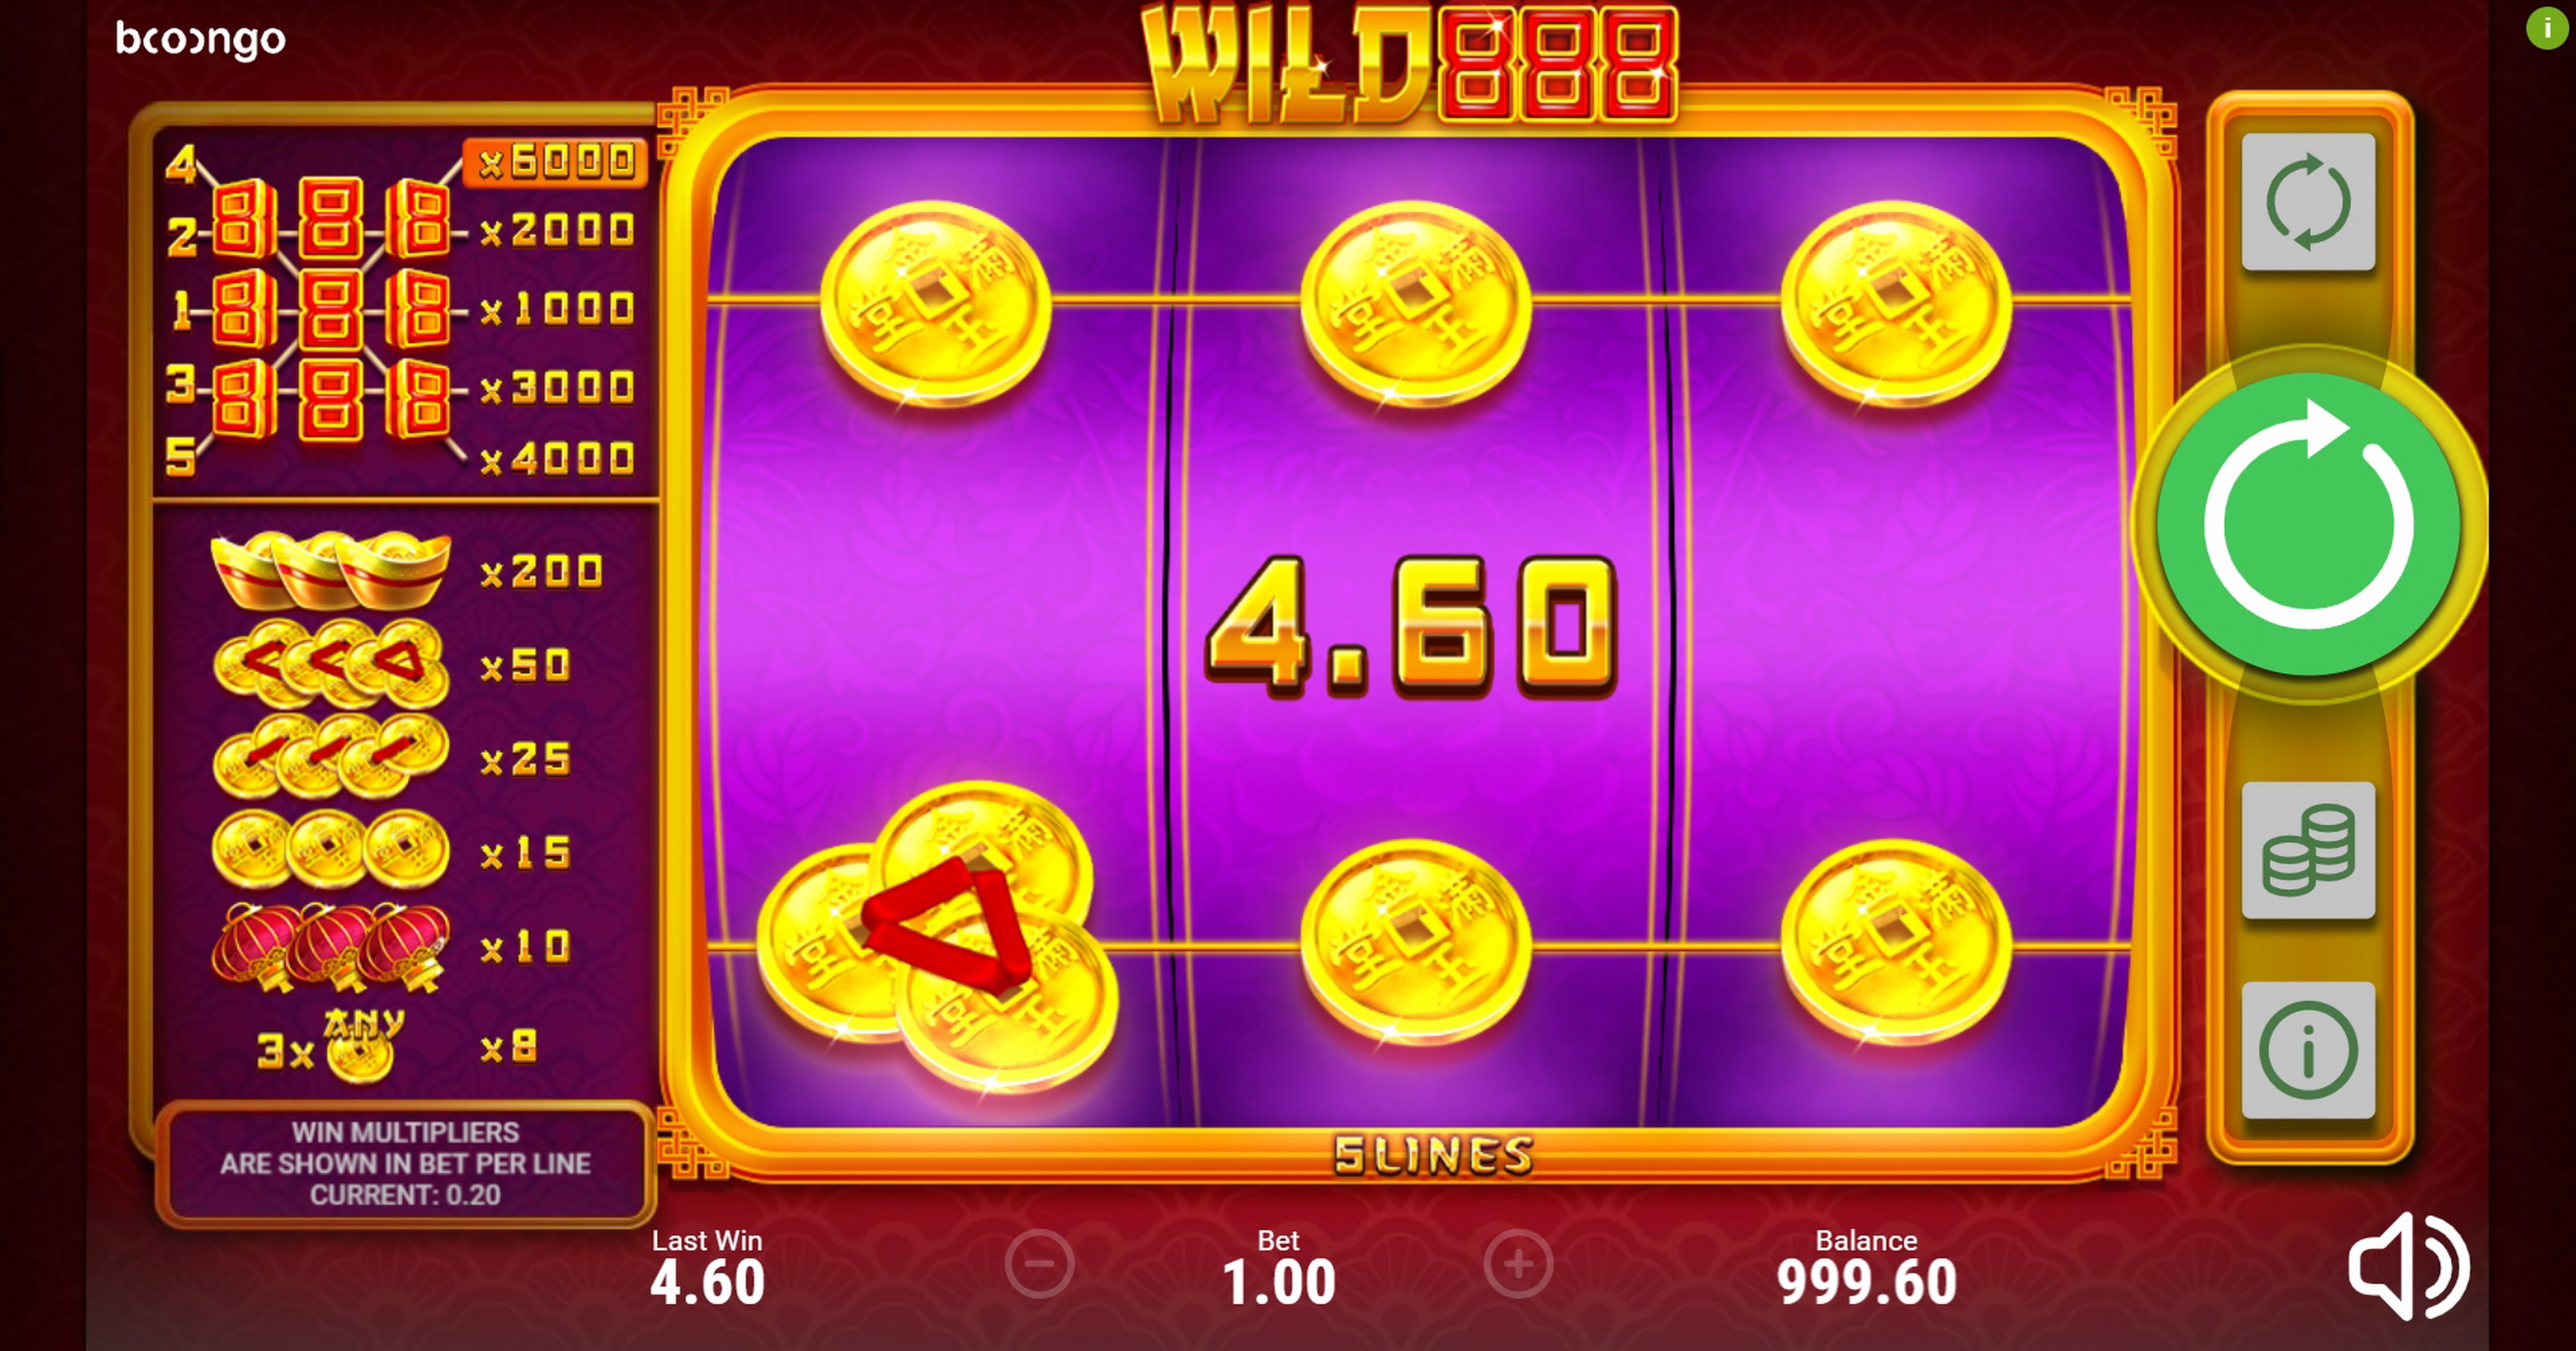 Win Money in Wild 888 Free Slot Game by Booongo Gaming